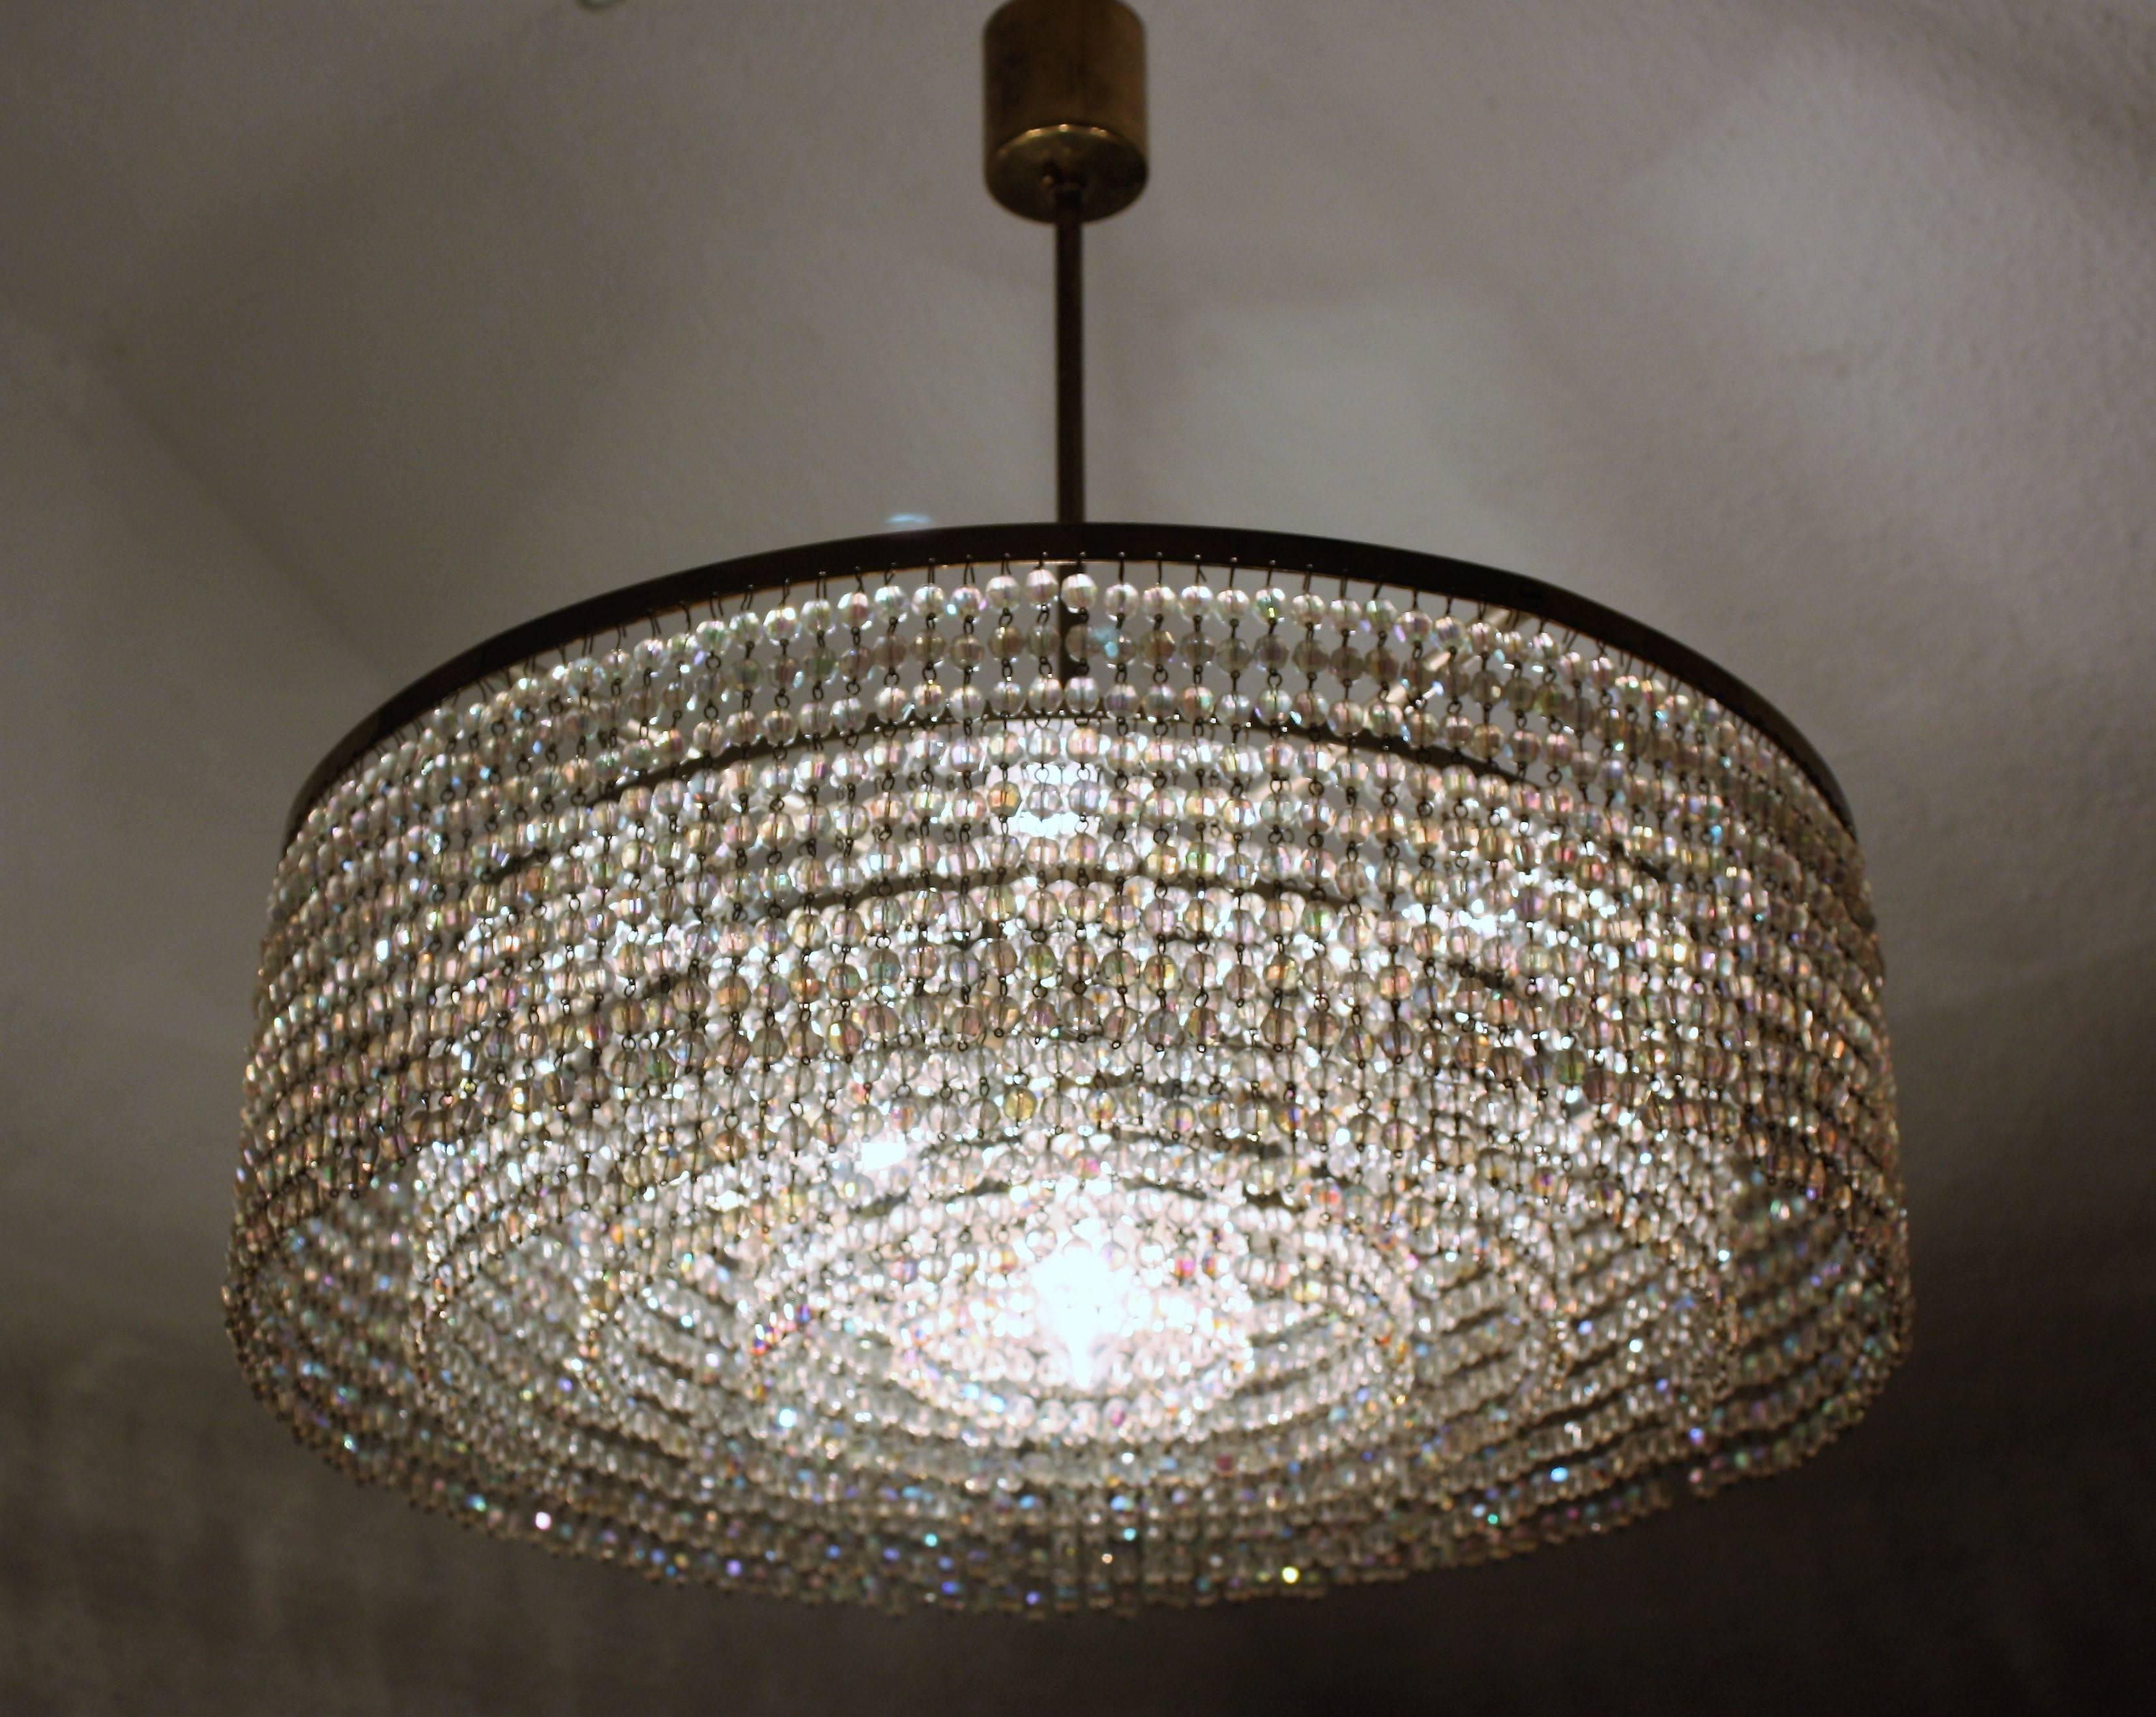 Large six-light chandelier with 3270 multicolor hand-cut crystal pearls on the five-tiered brass frame.
In very good vintage condition and wonderful patina.